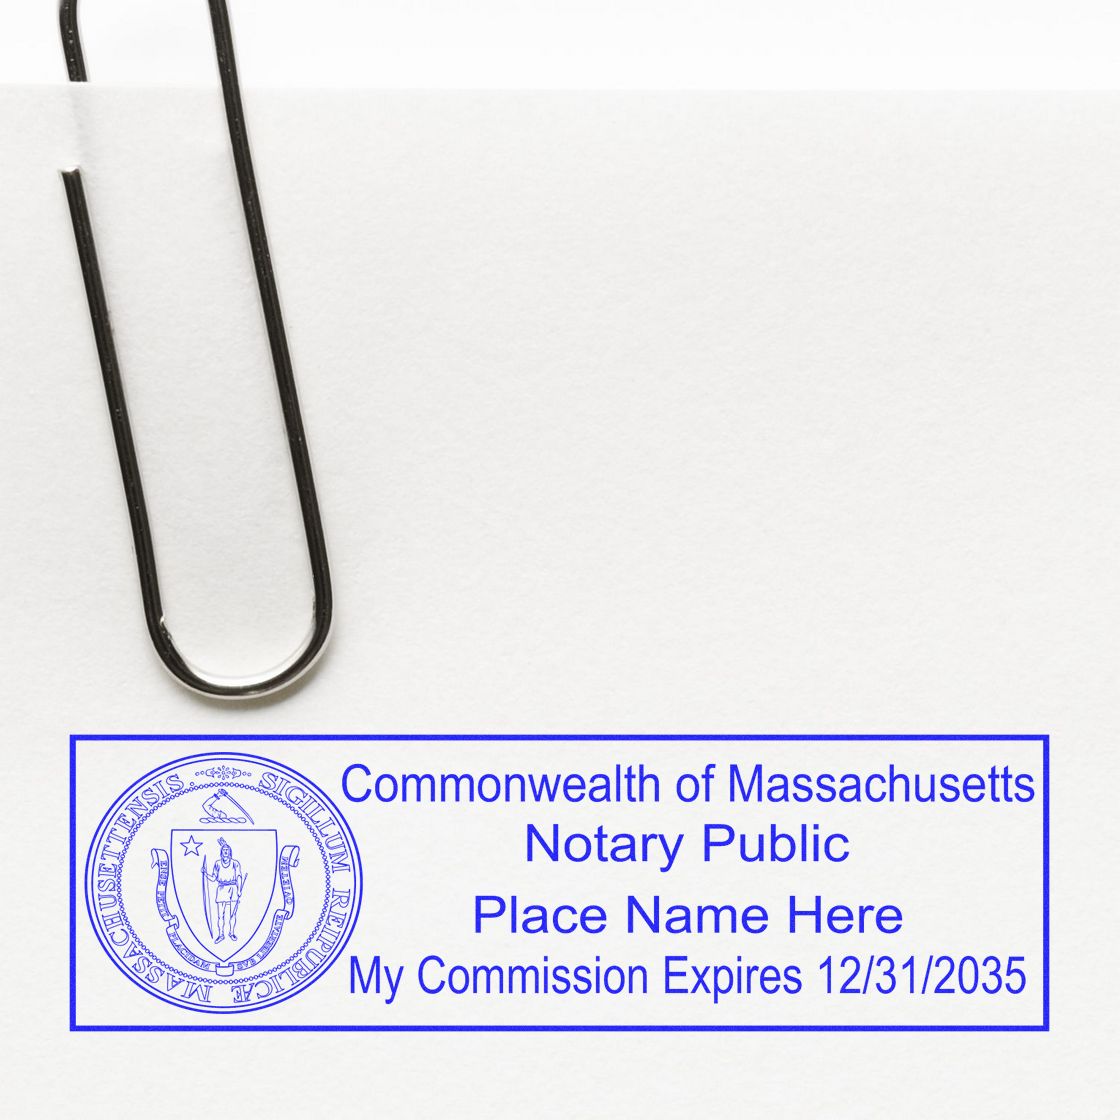 The MaxLight Premium Pre-Inked Massachusetts State Seal Notarial Stamp stamp impression comes to life with a crisp, detailed photo on paper - showcasing true professional quality.